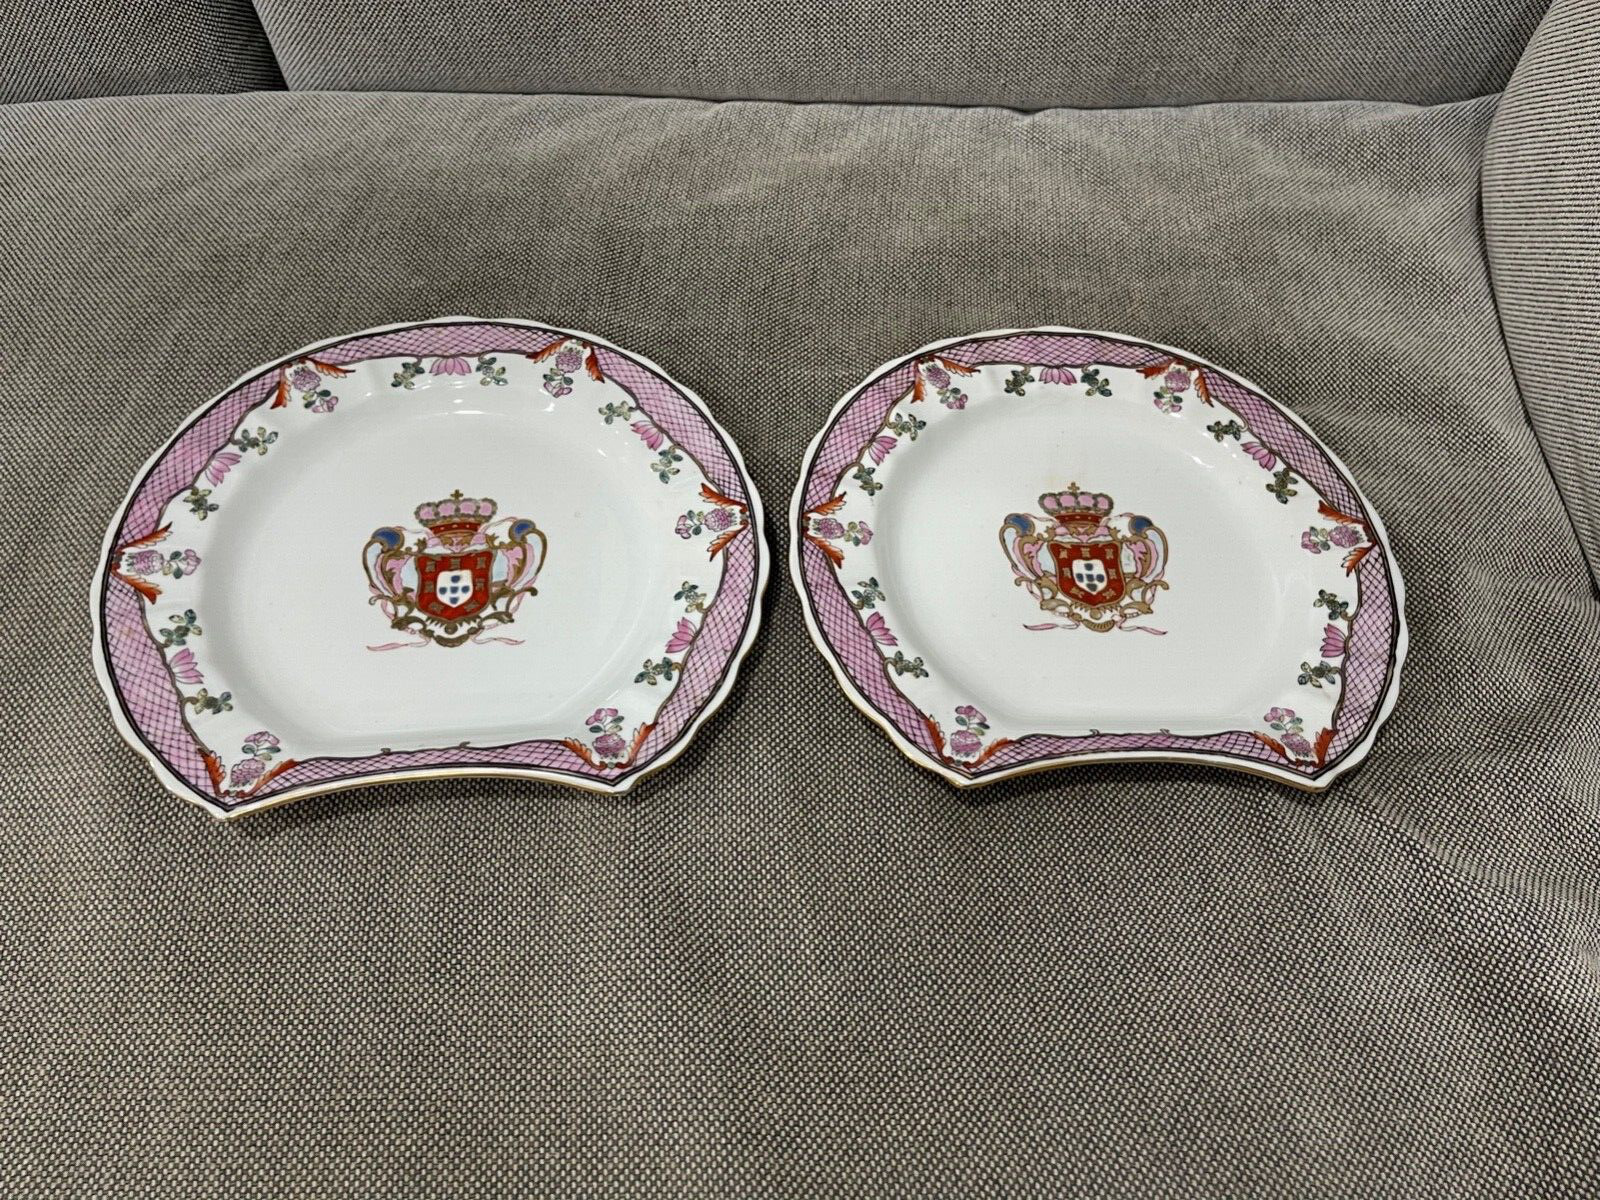 Chinese Pair of Porcelain Plates w/ Armorial Style & Flowers Decoration